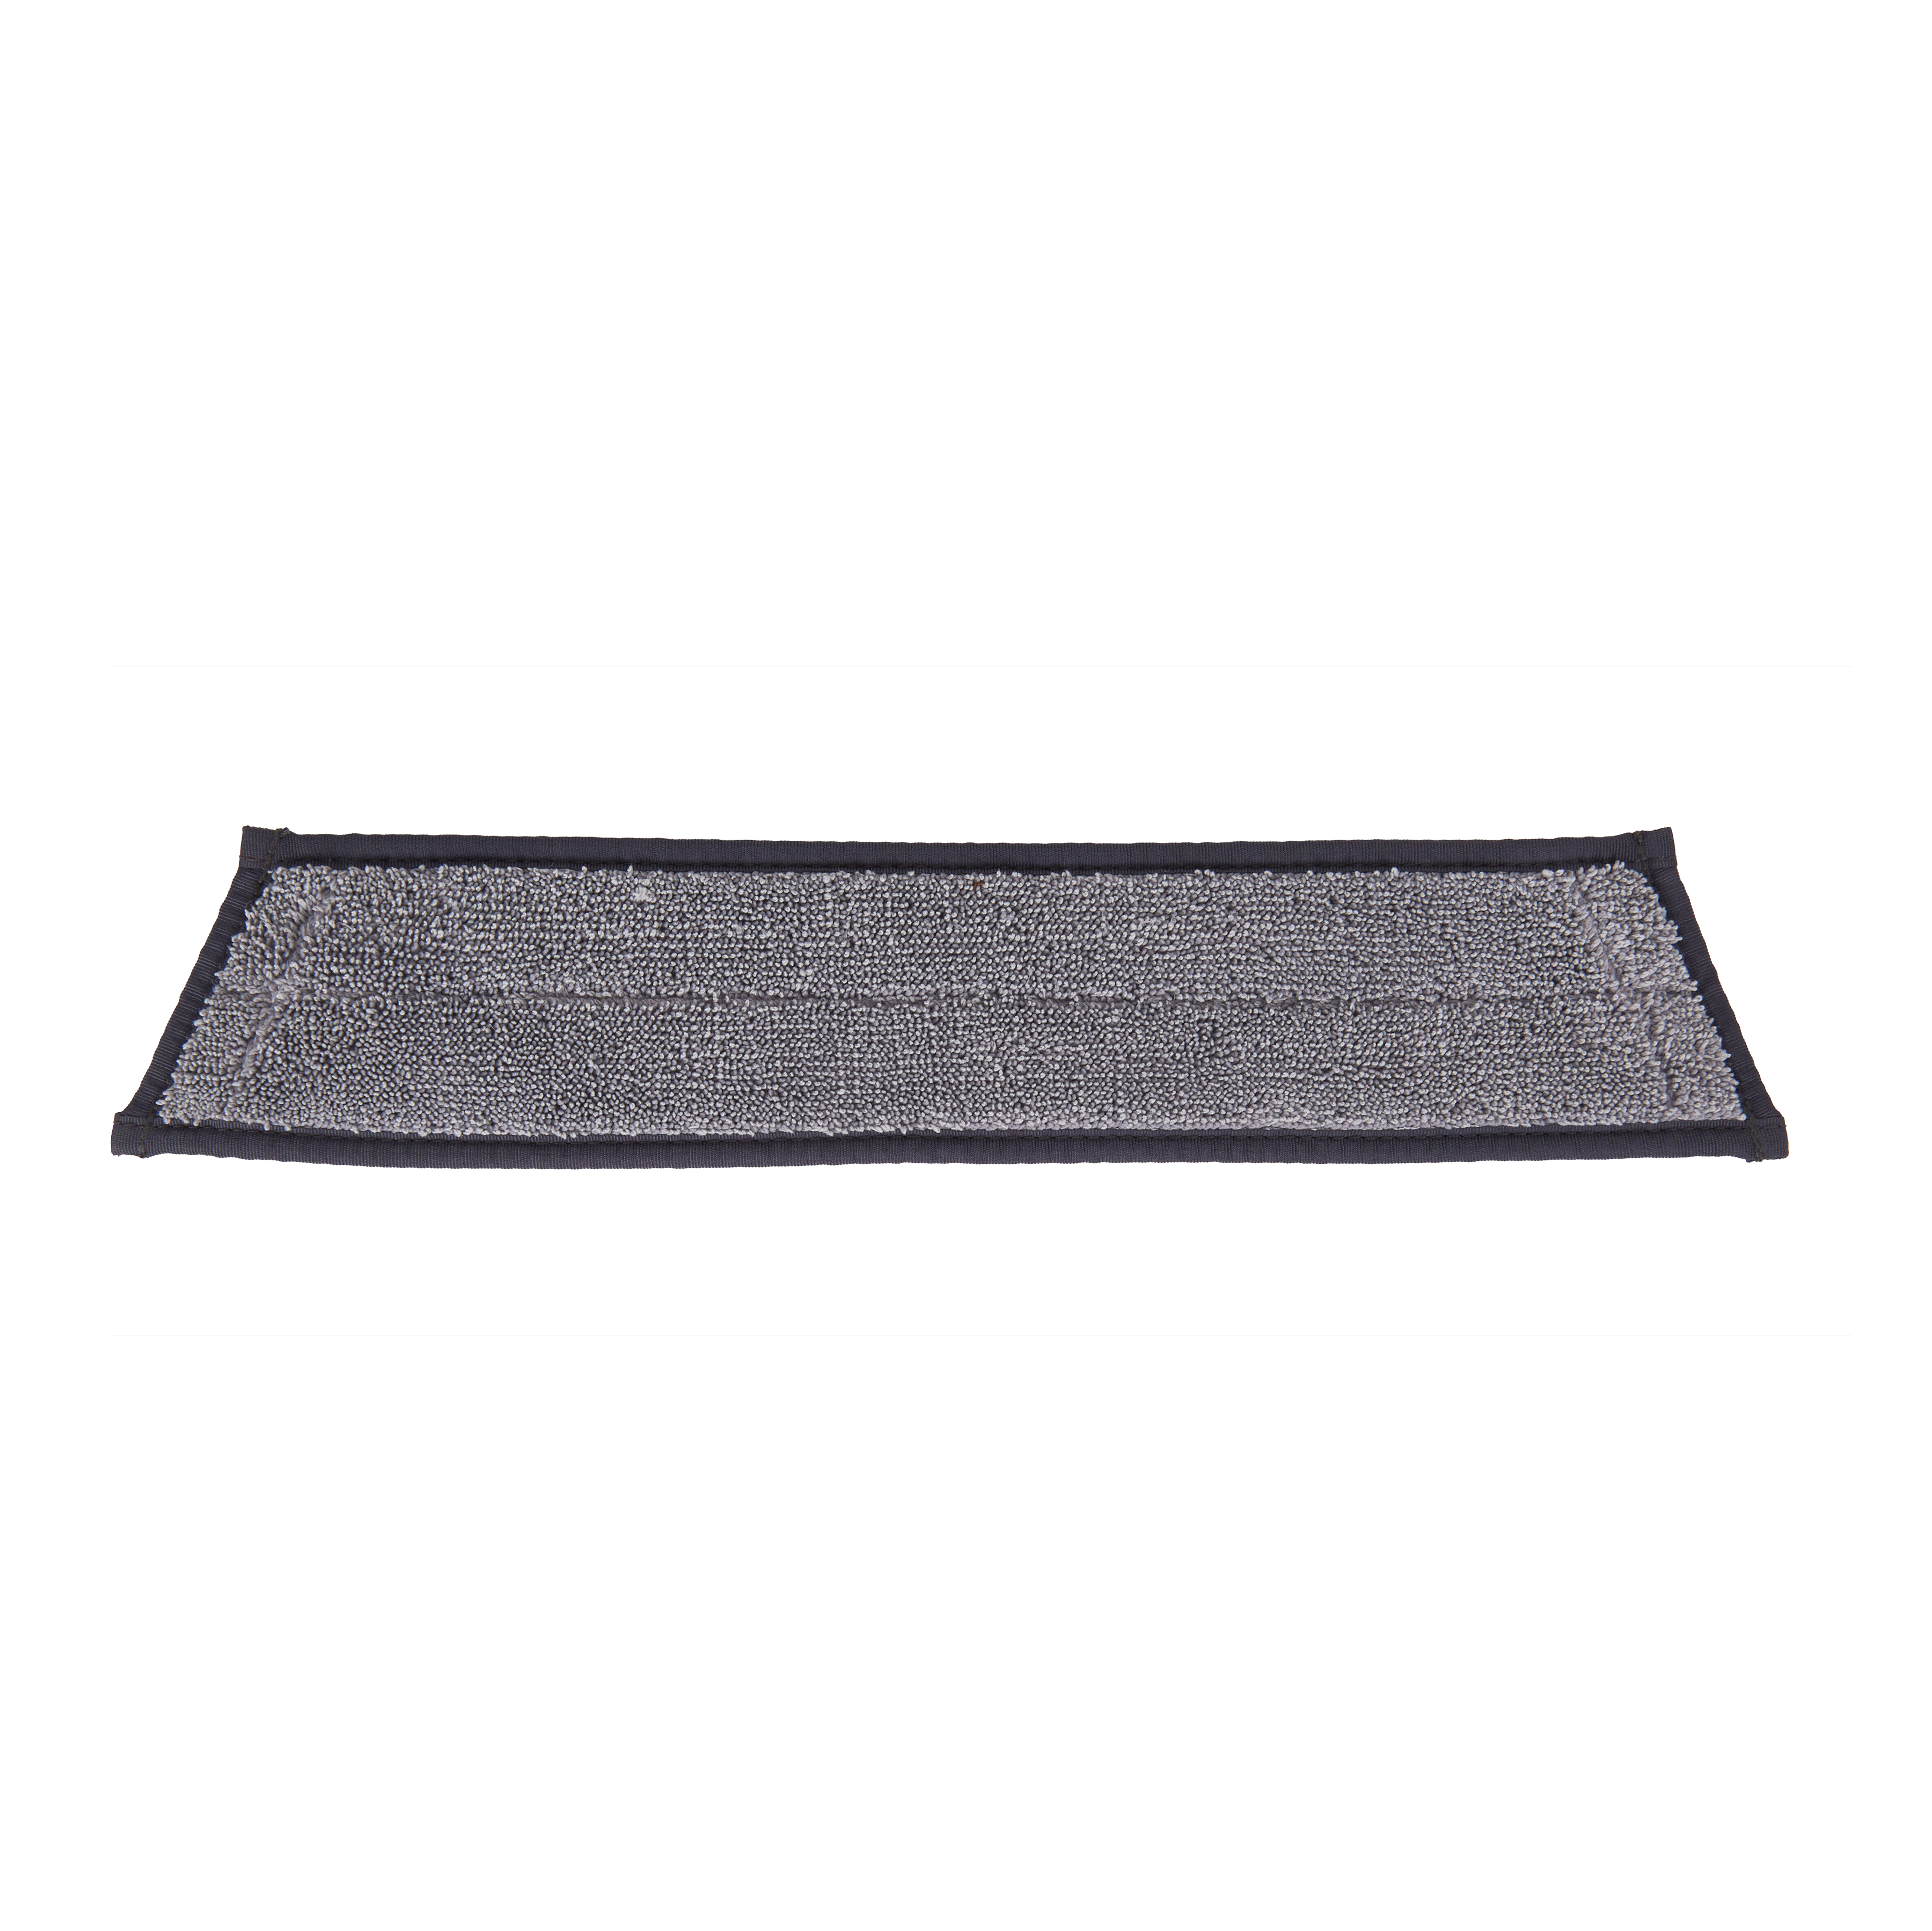 Microfiber cleaning pad for PowerPad